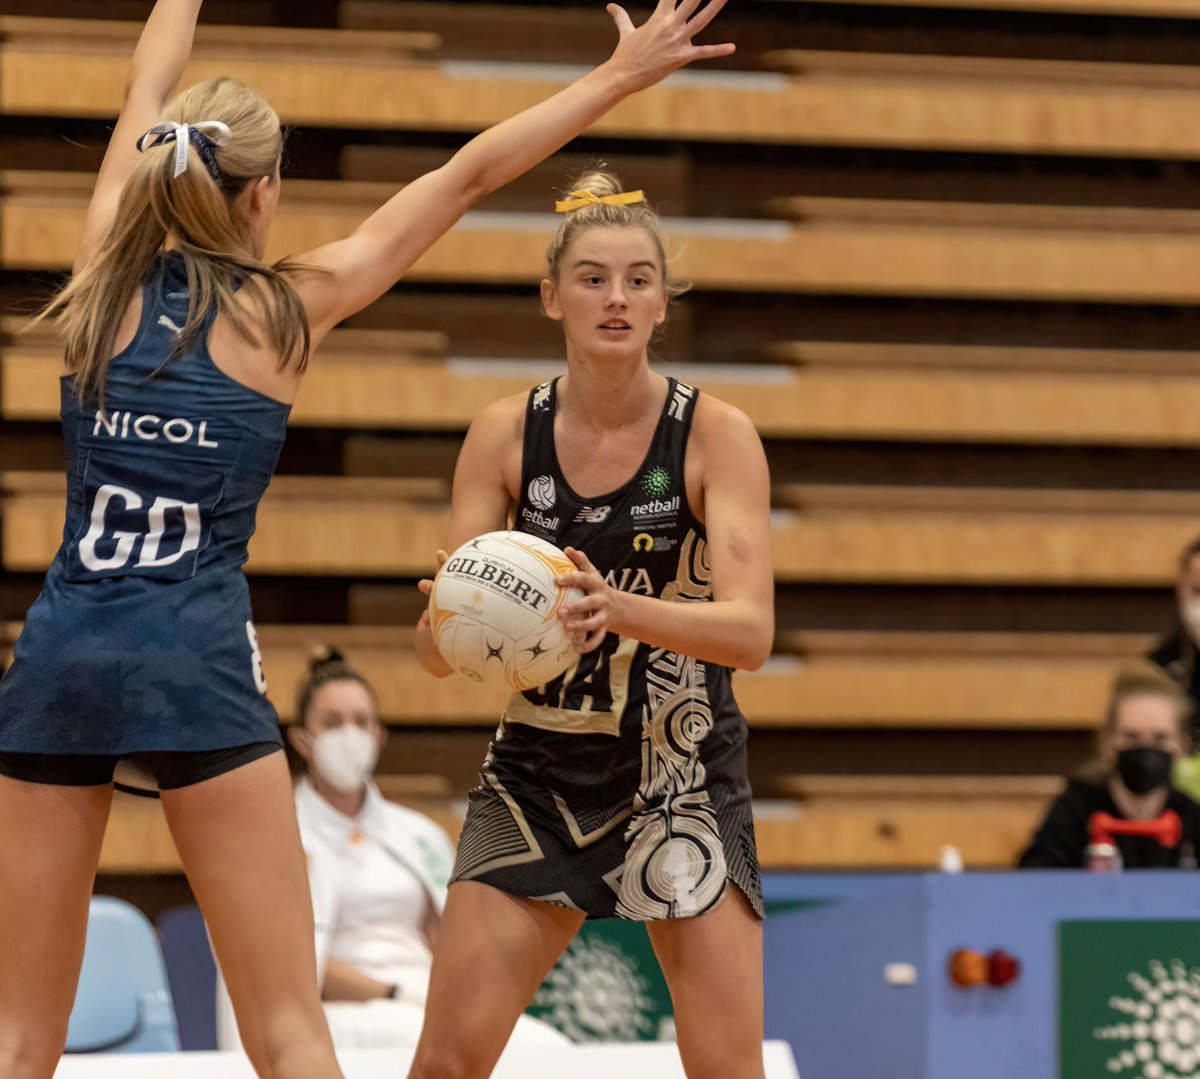 Good luck to our State Teams in tomorrow morning's National Netball Championships Finals! The 17Us play Tasmania for 5th place at 6.45am (wst) and the 19Us play Victoria for the Bronze Medal at 9.15am (wst). Tune in to watch both games live - bit.ly/KayoFreebiesNNC. GO WA!!